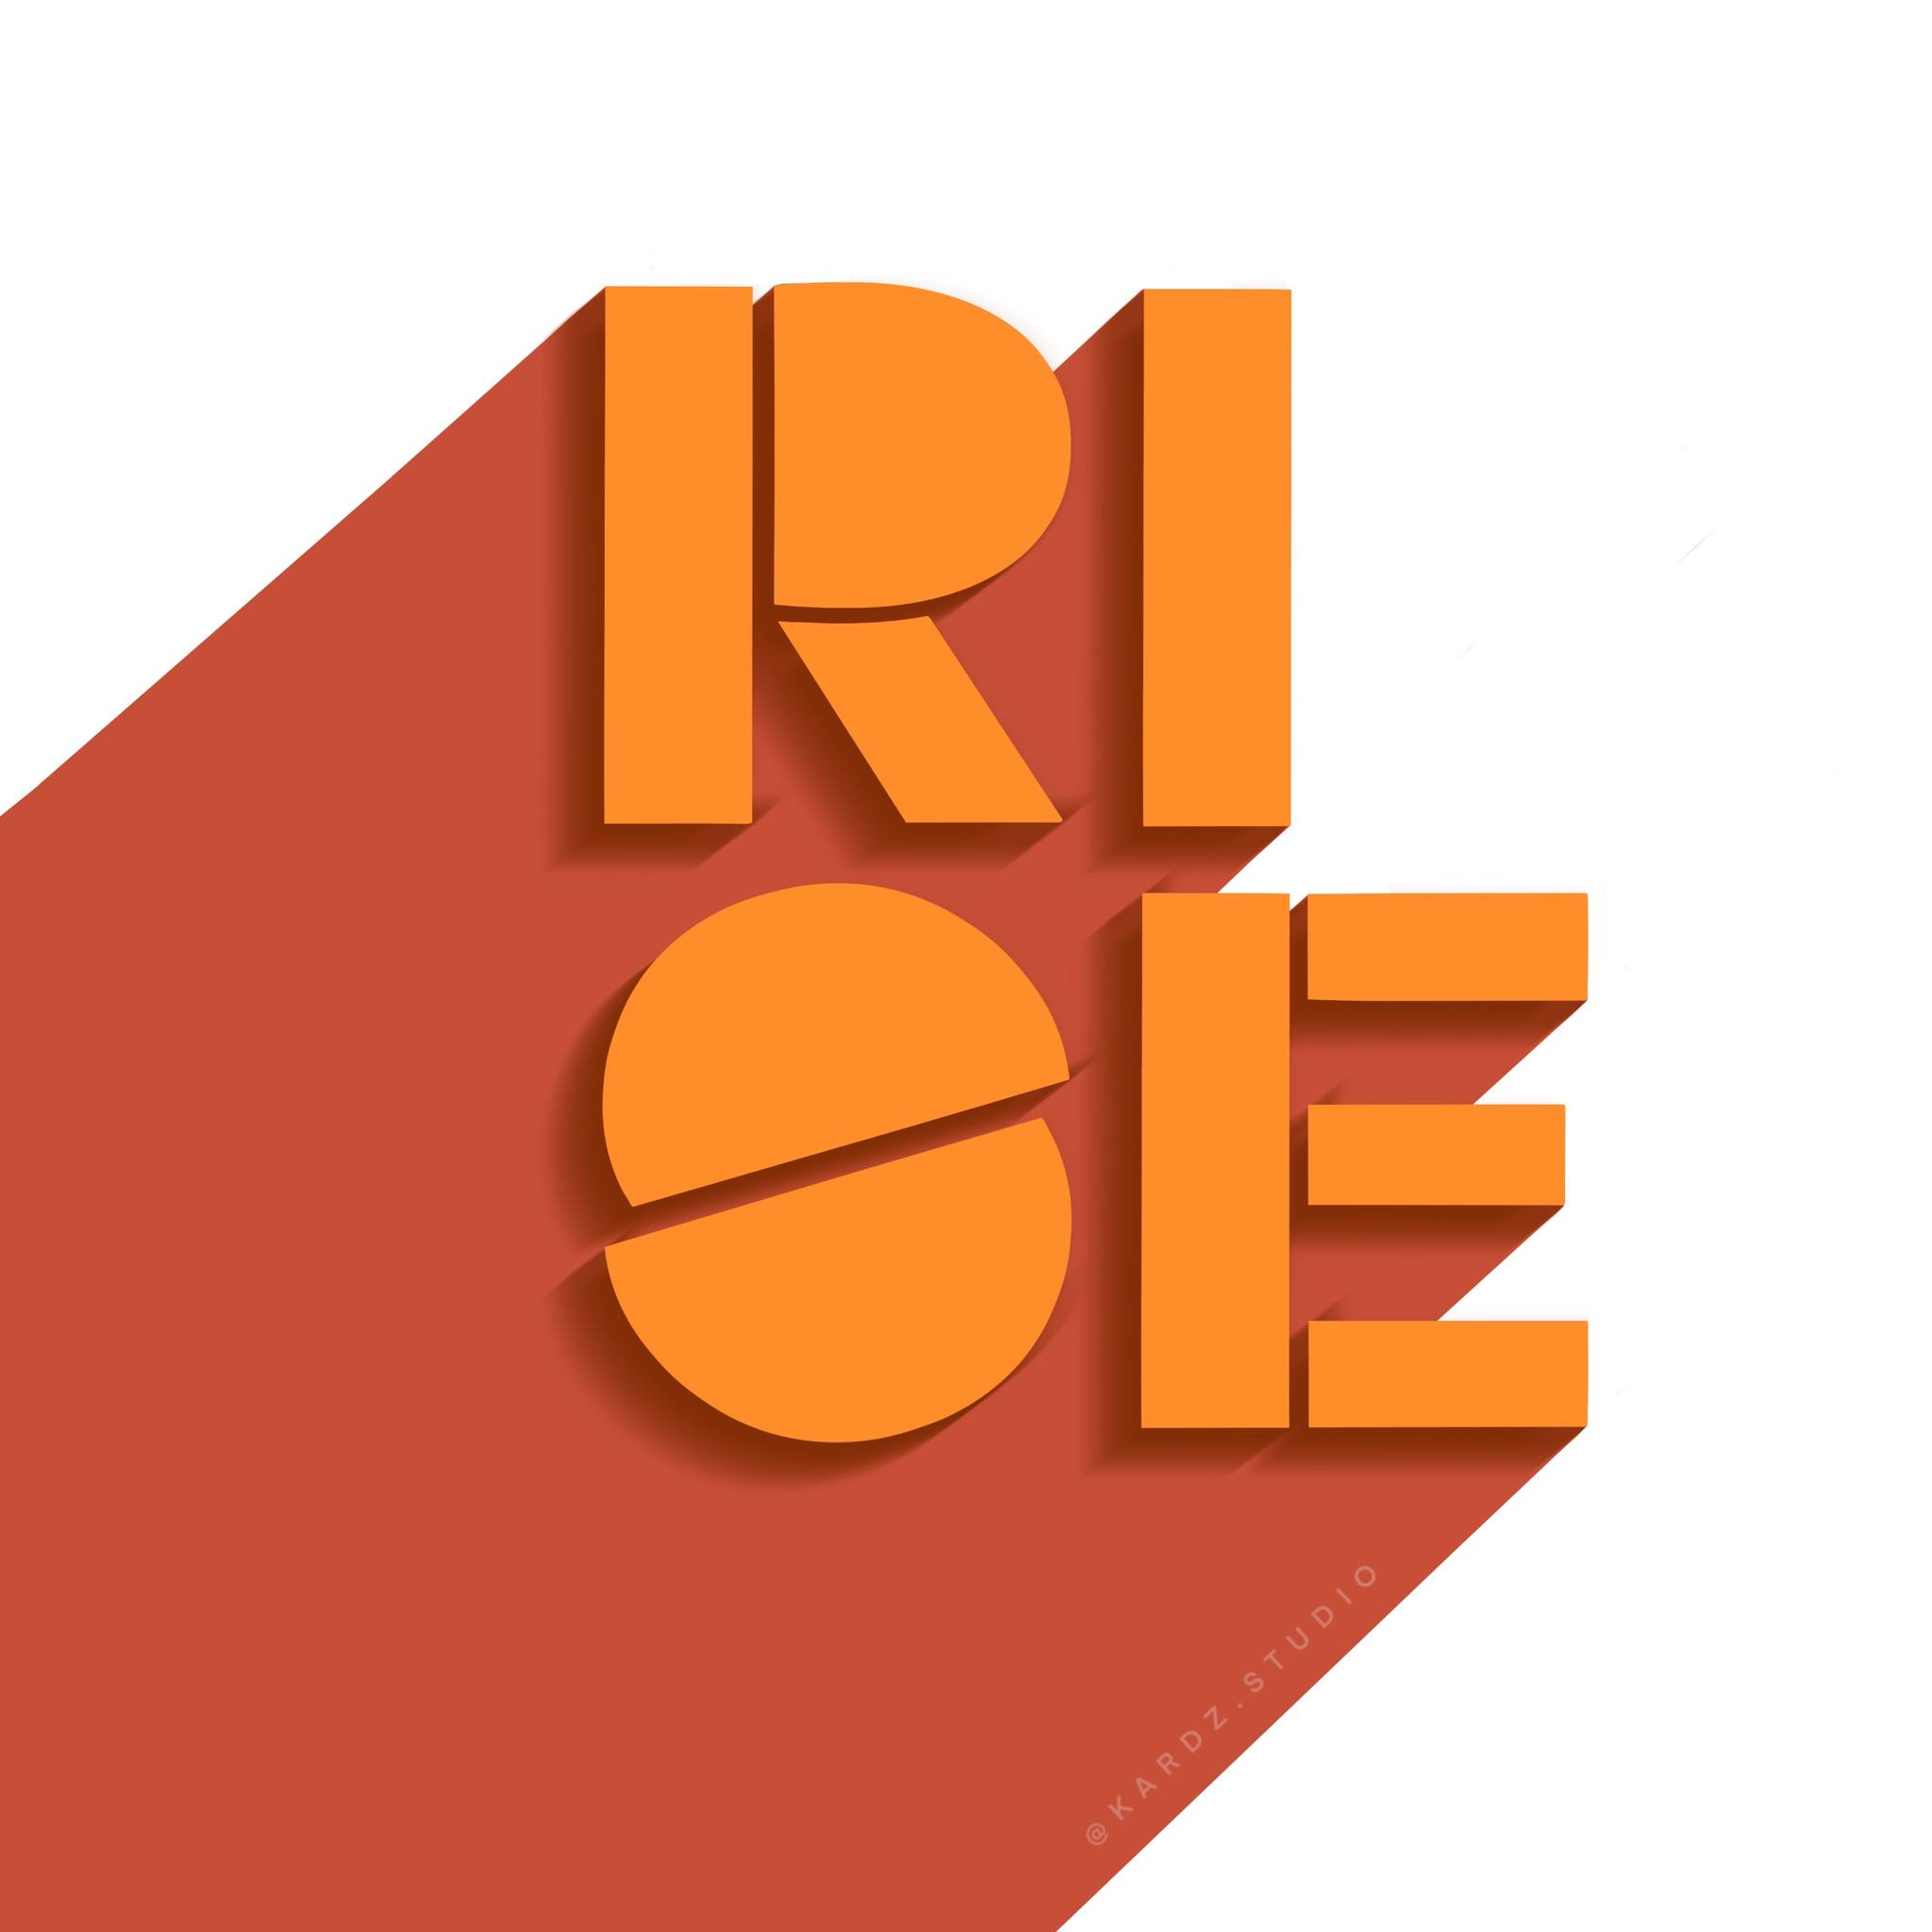 Day 13 "Geometric" Something more abstract for today´s prompt! 

#letteringstylechallenge2023 de Aurelie Maron 
y "Rise"